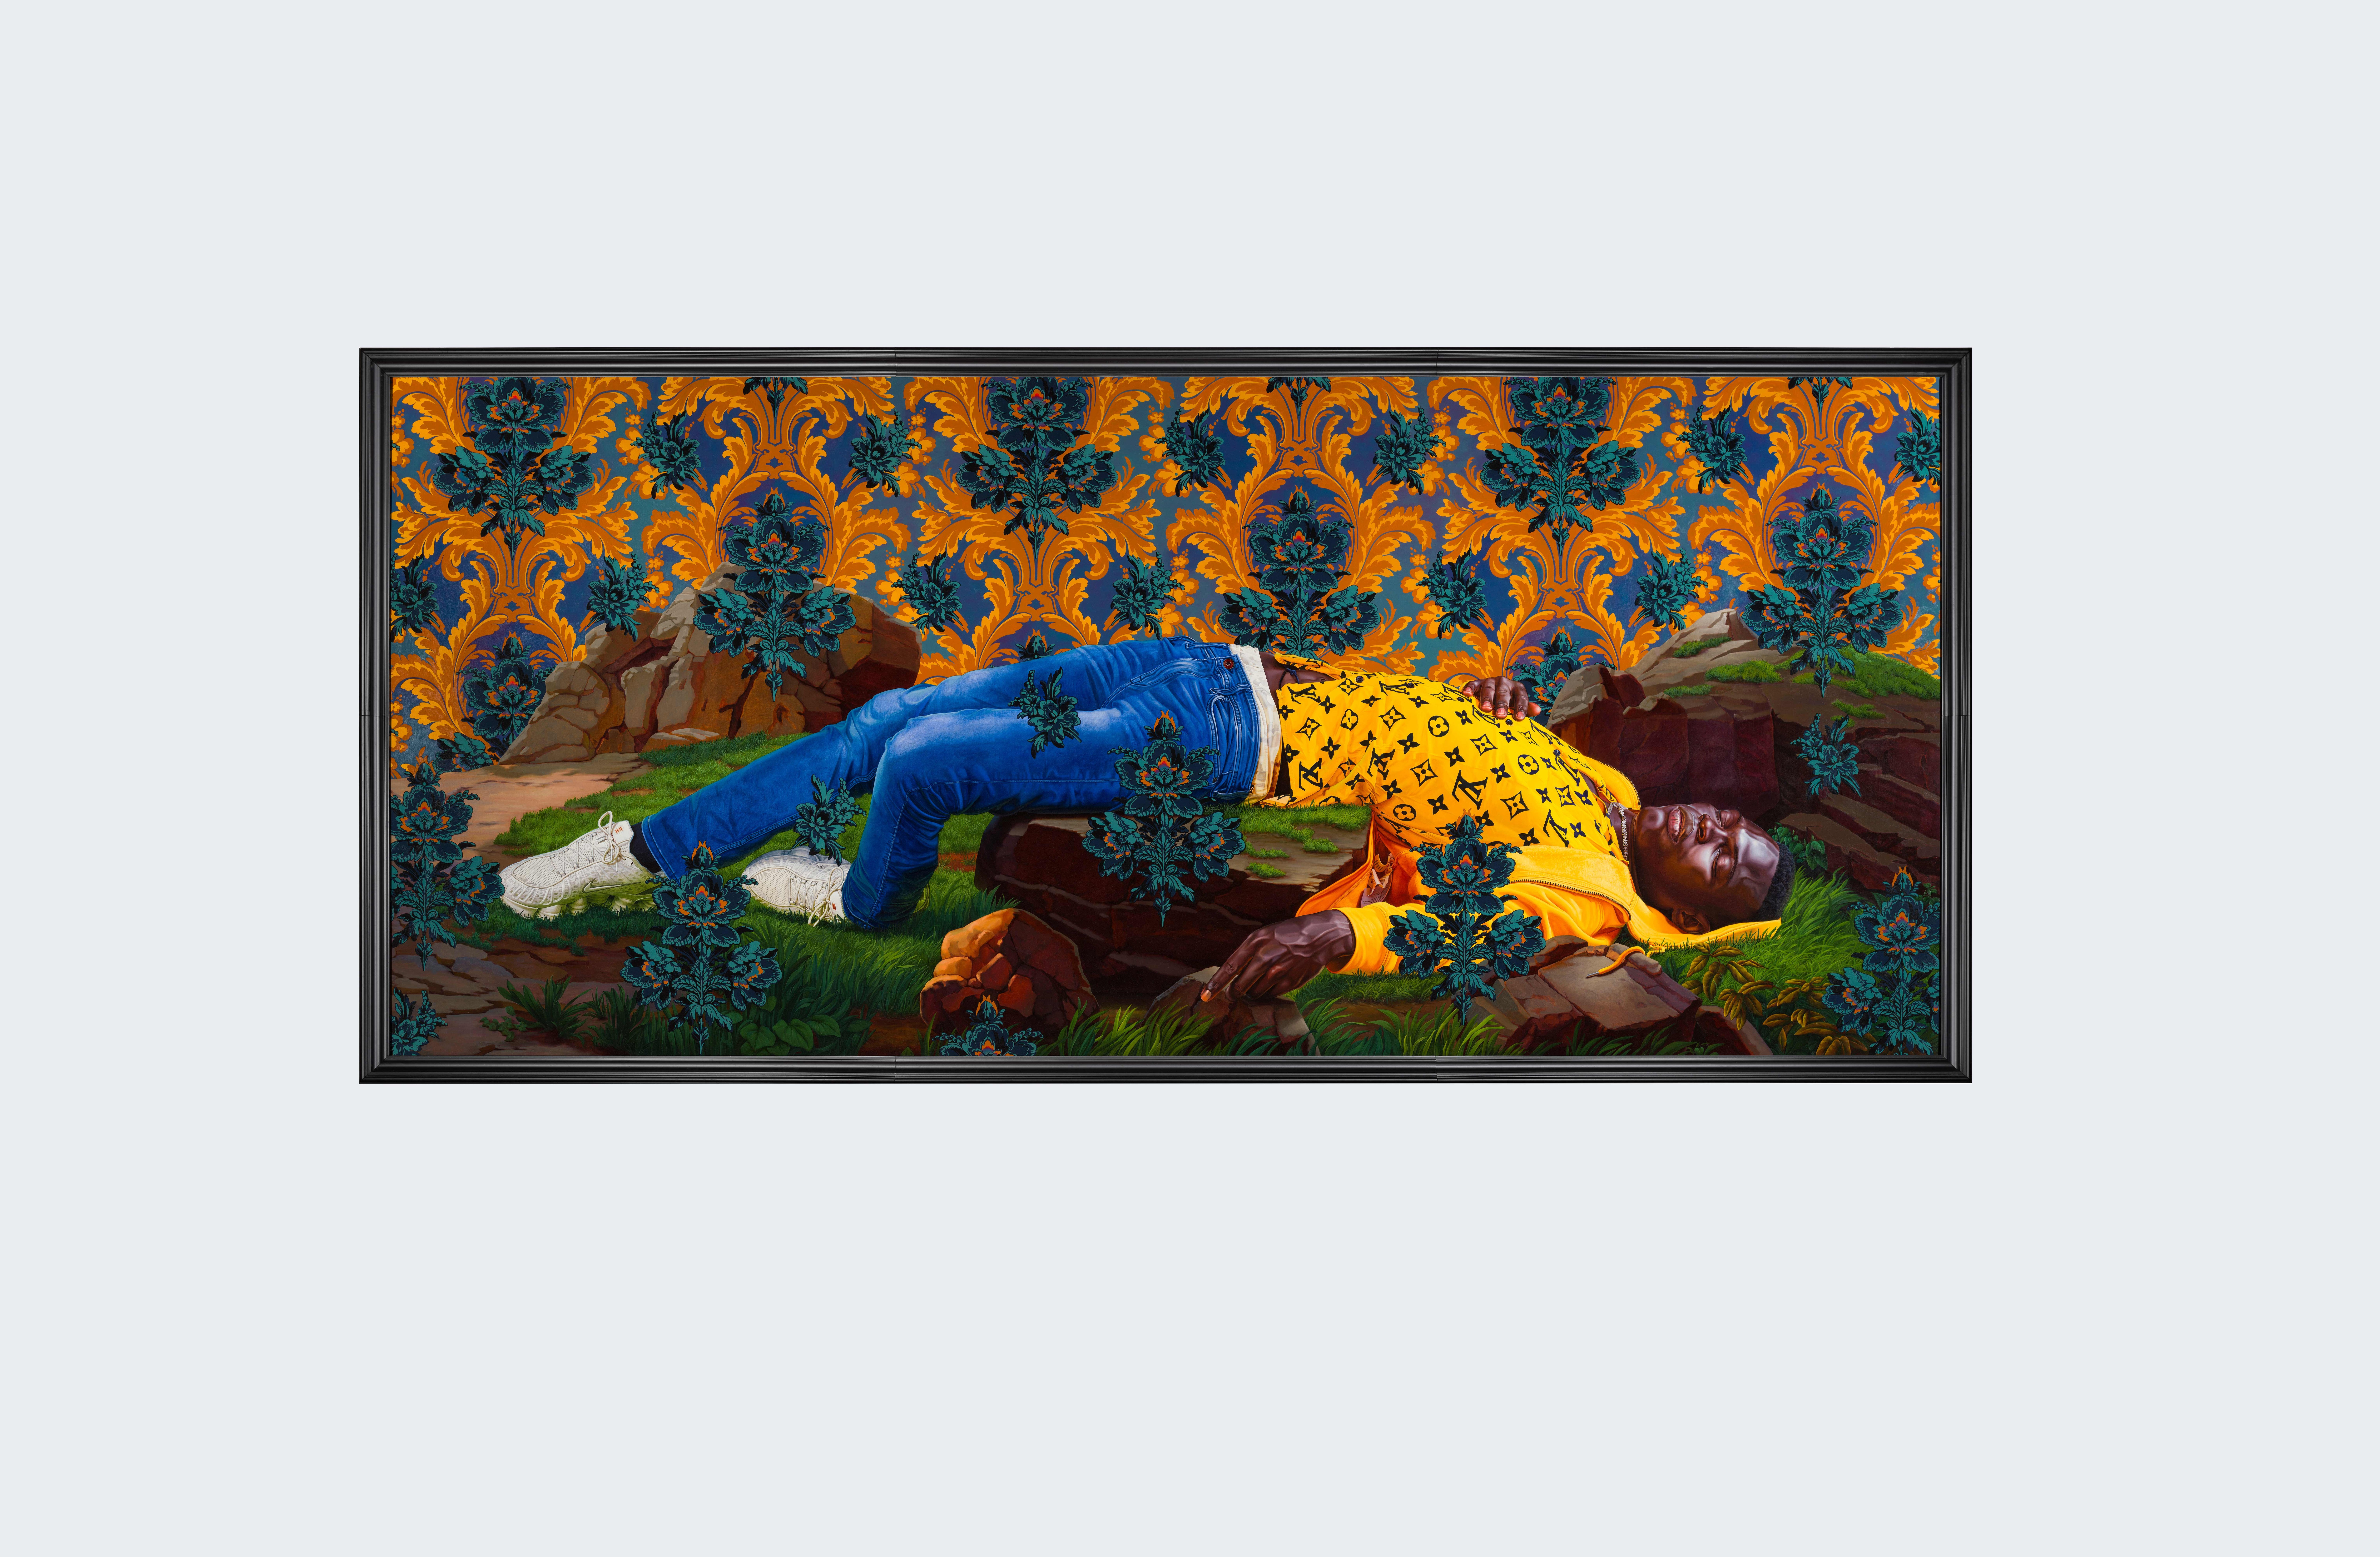 Kehinde Wiley's Reclamation of Black Lives